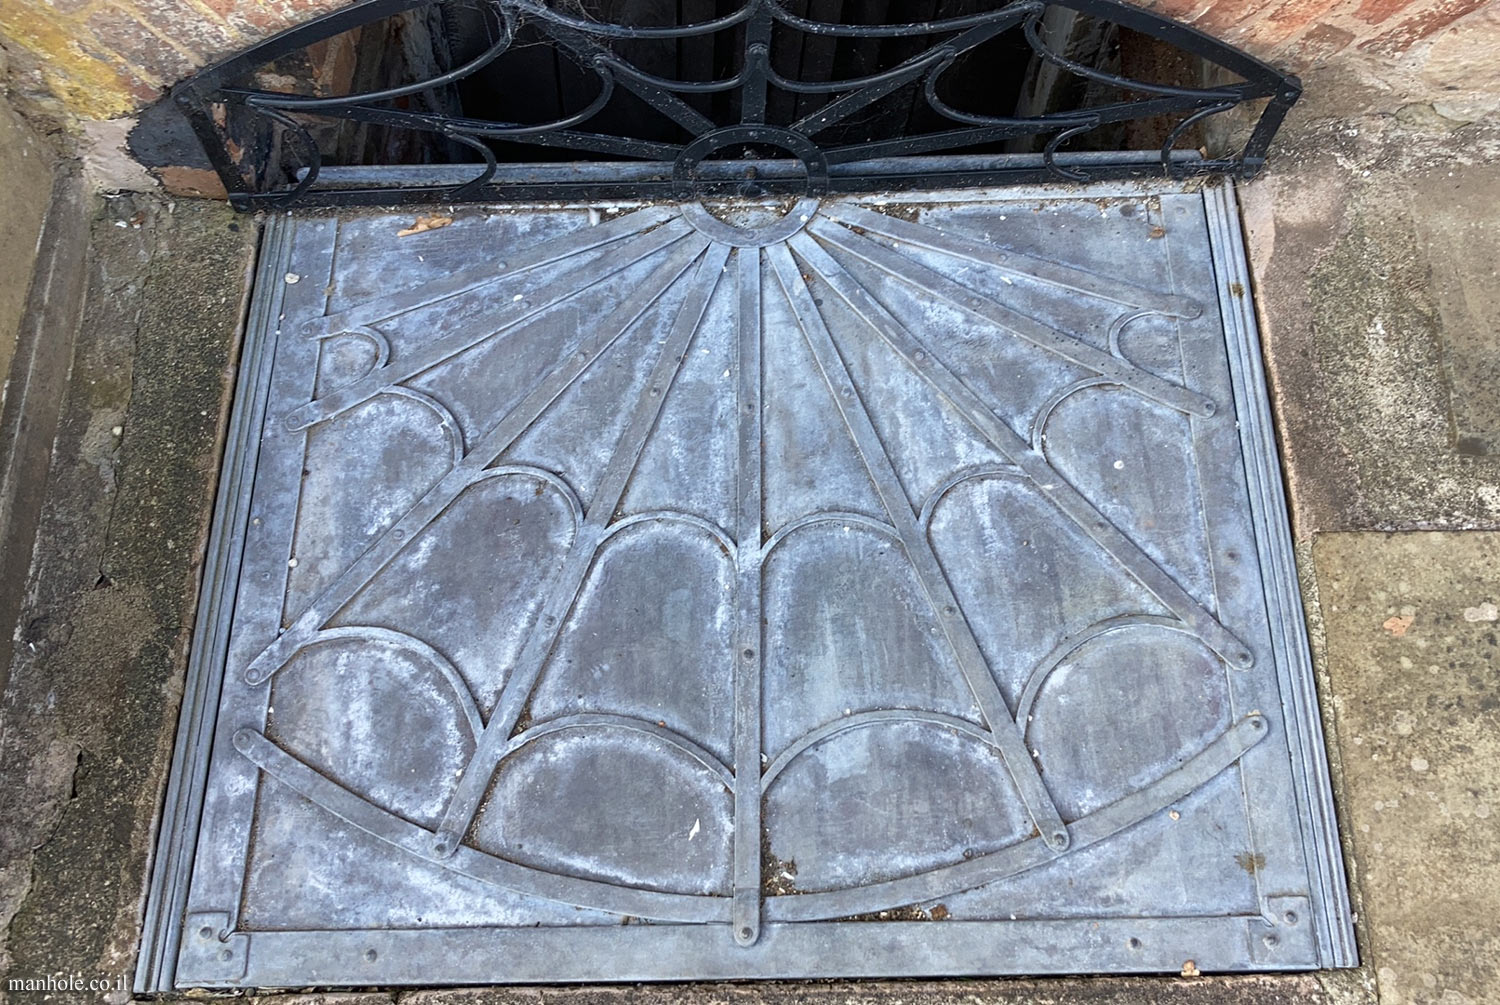 Ludlow - A lid with a background resembling a cobweb and a drain opening at the end